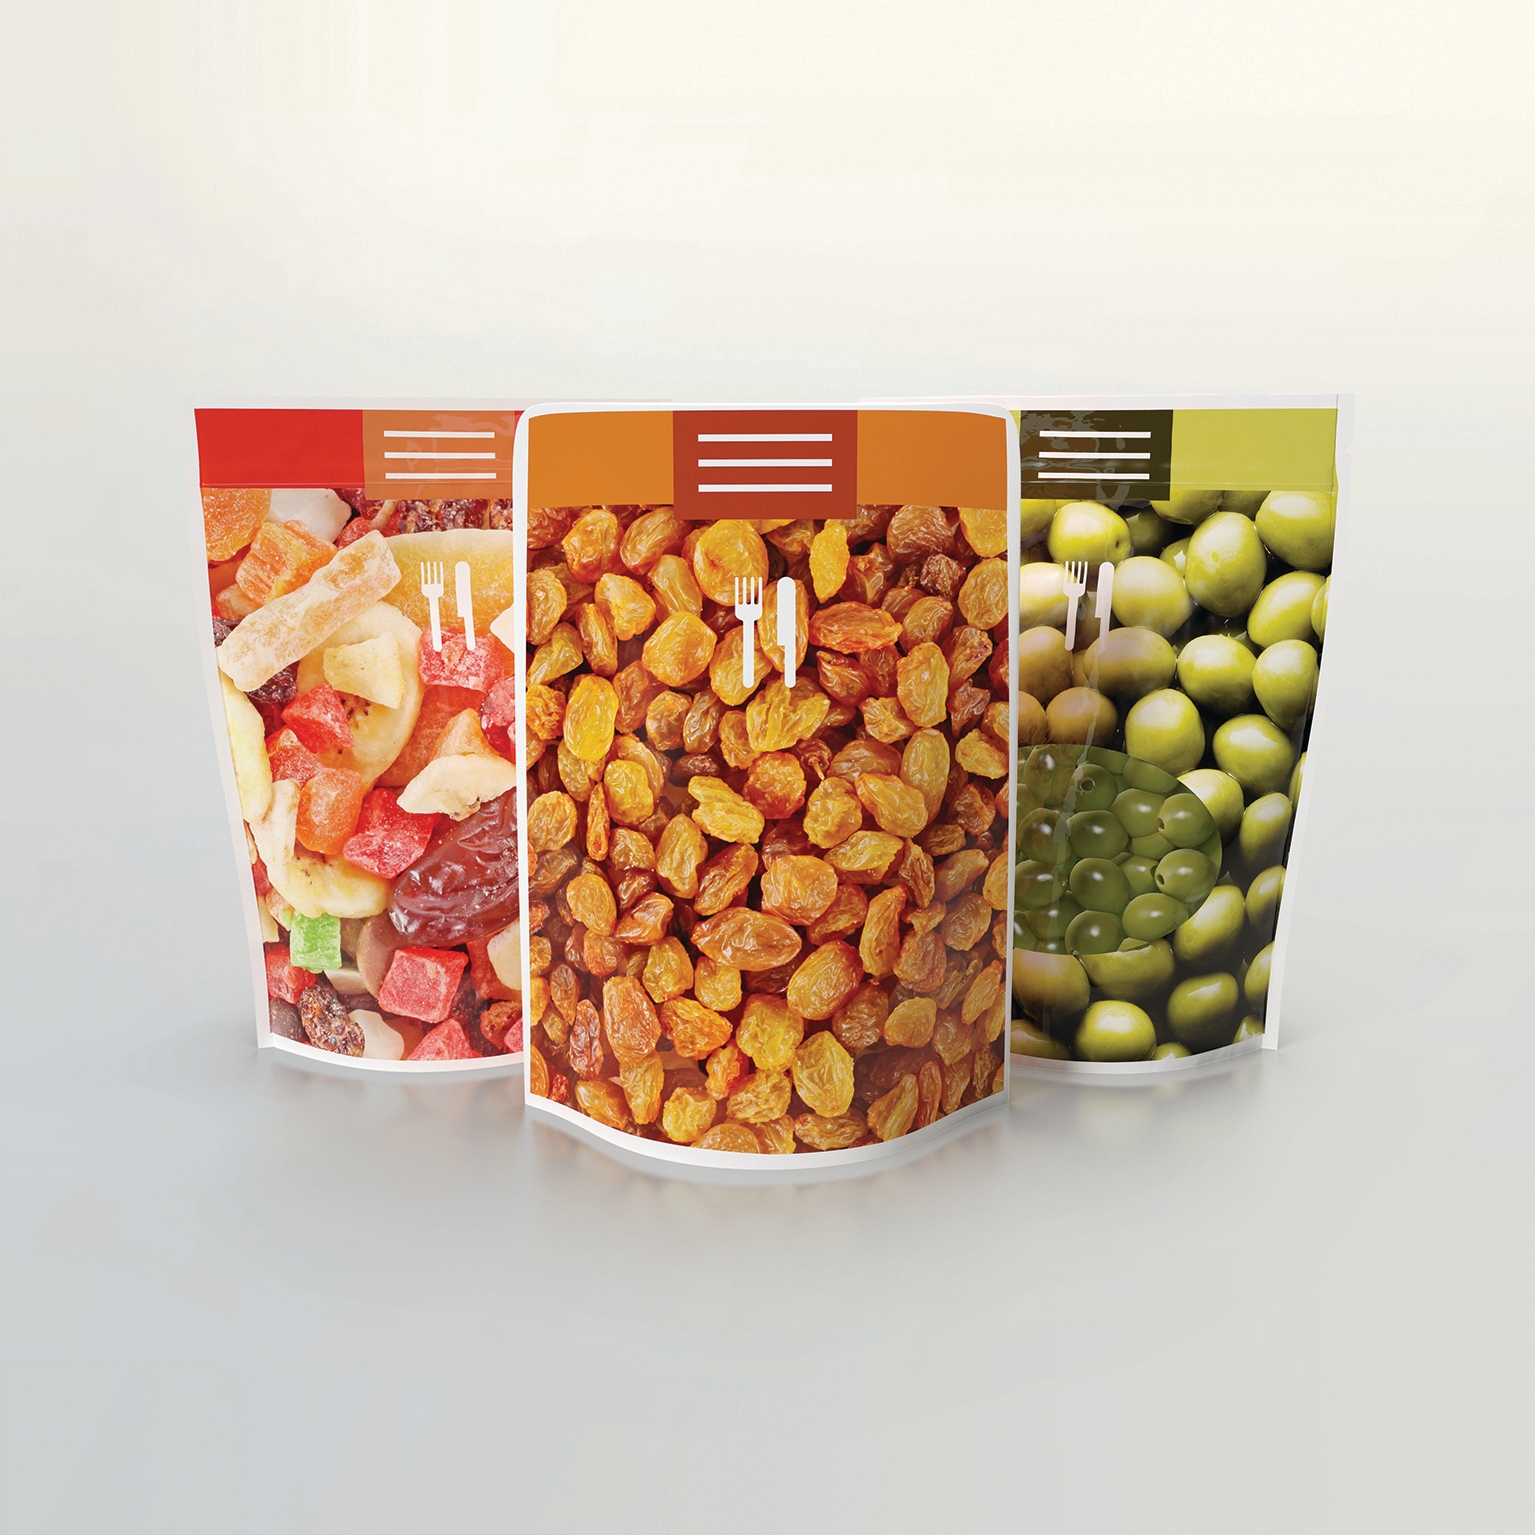 Multiple benefits: multi-layer packaging